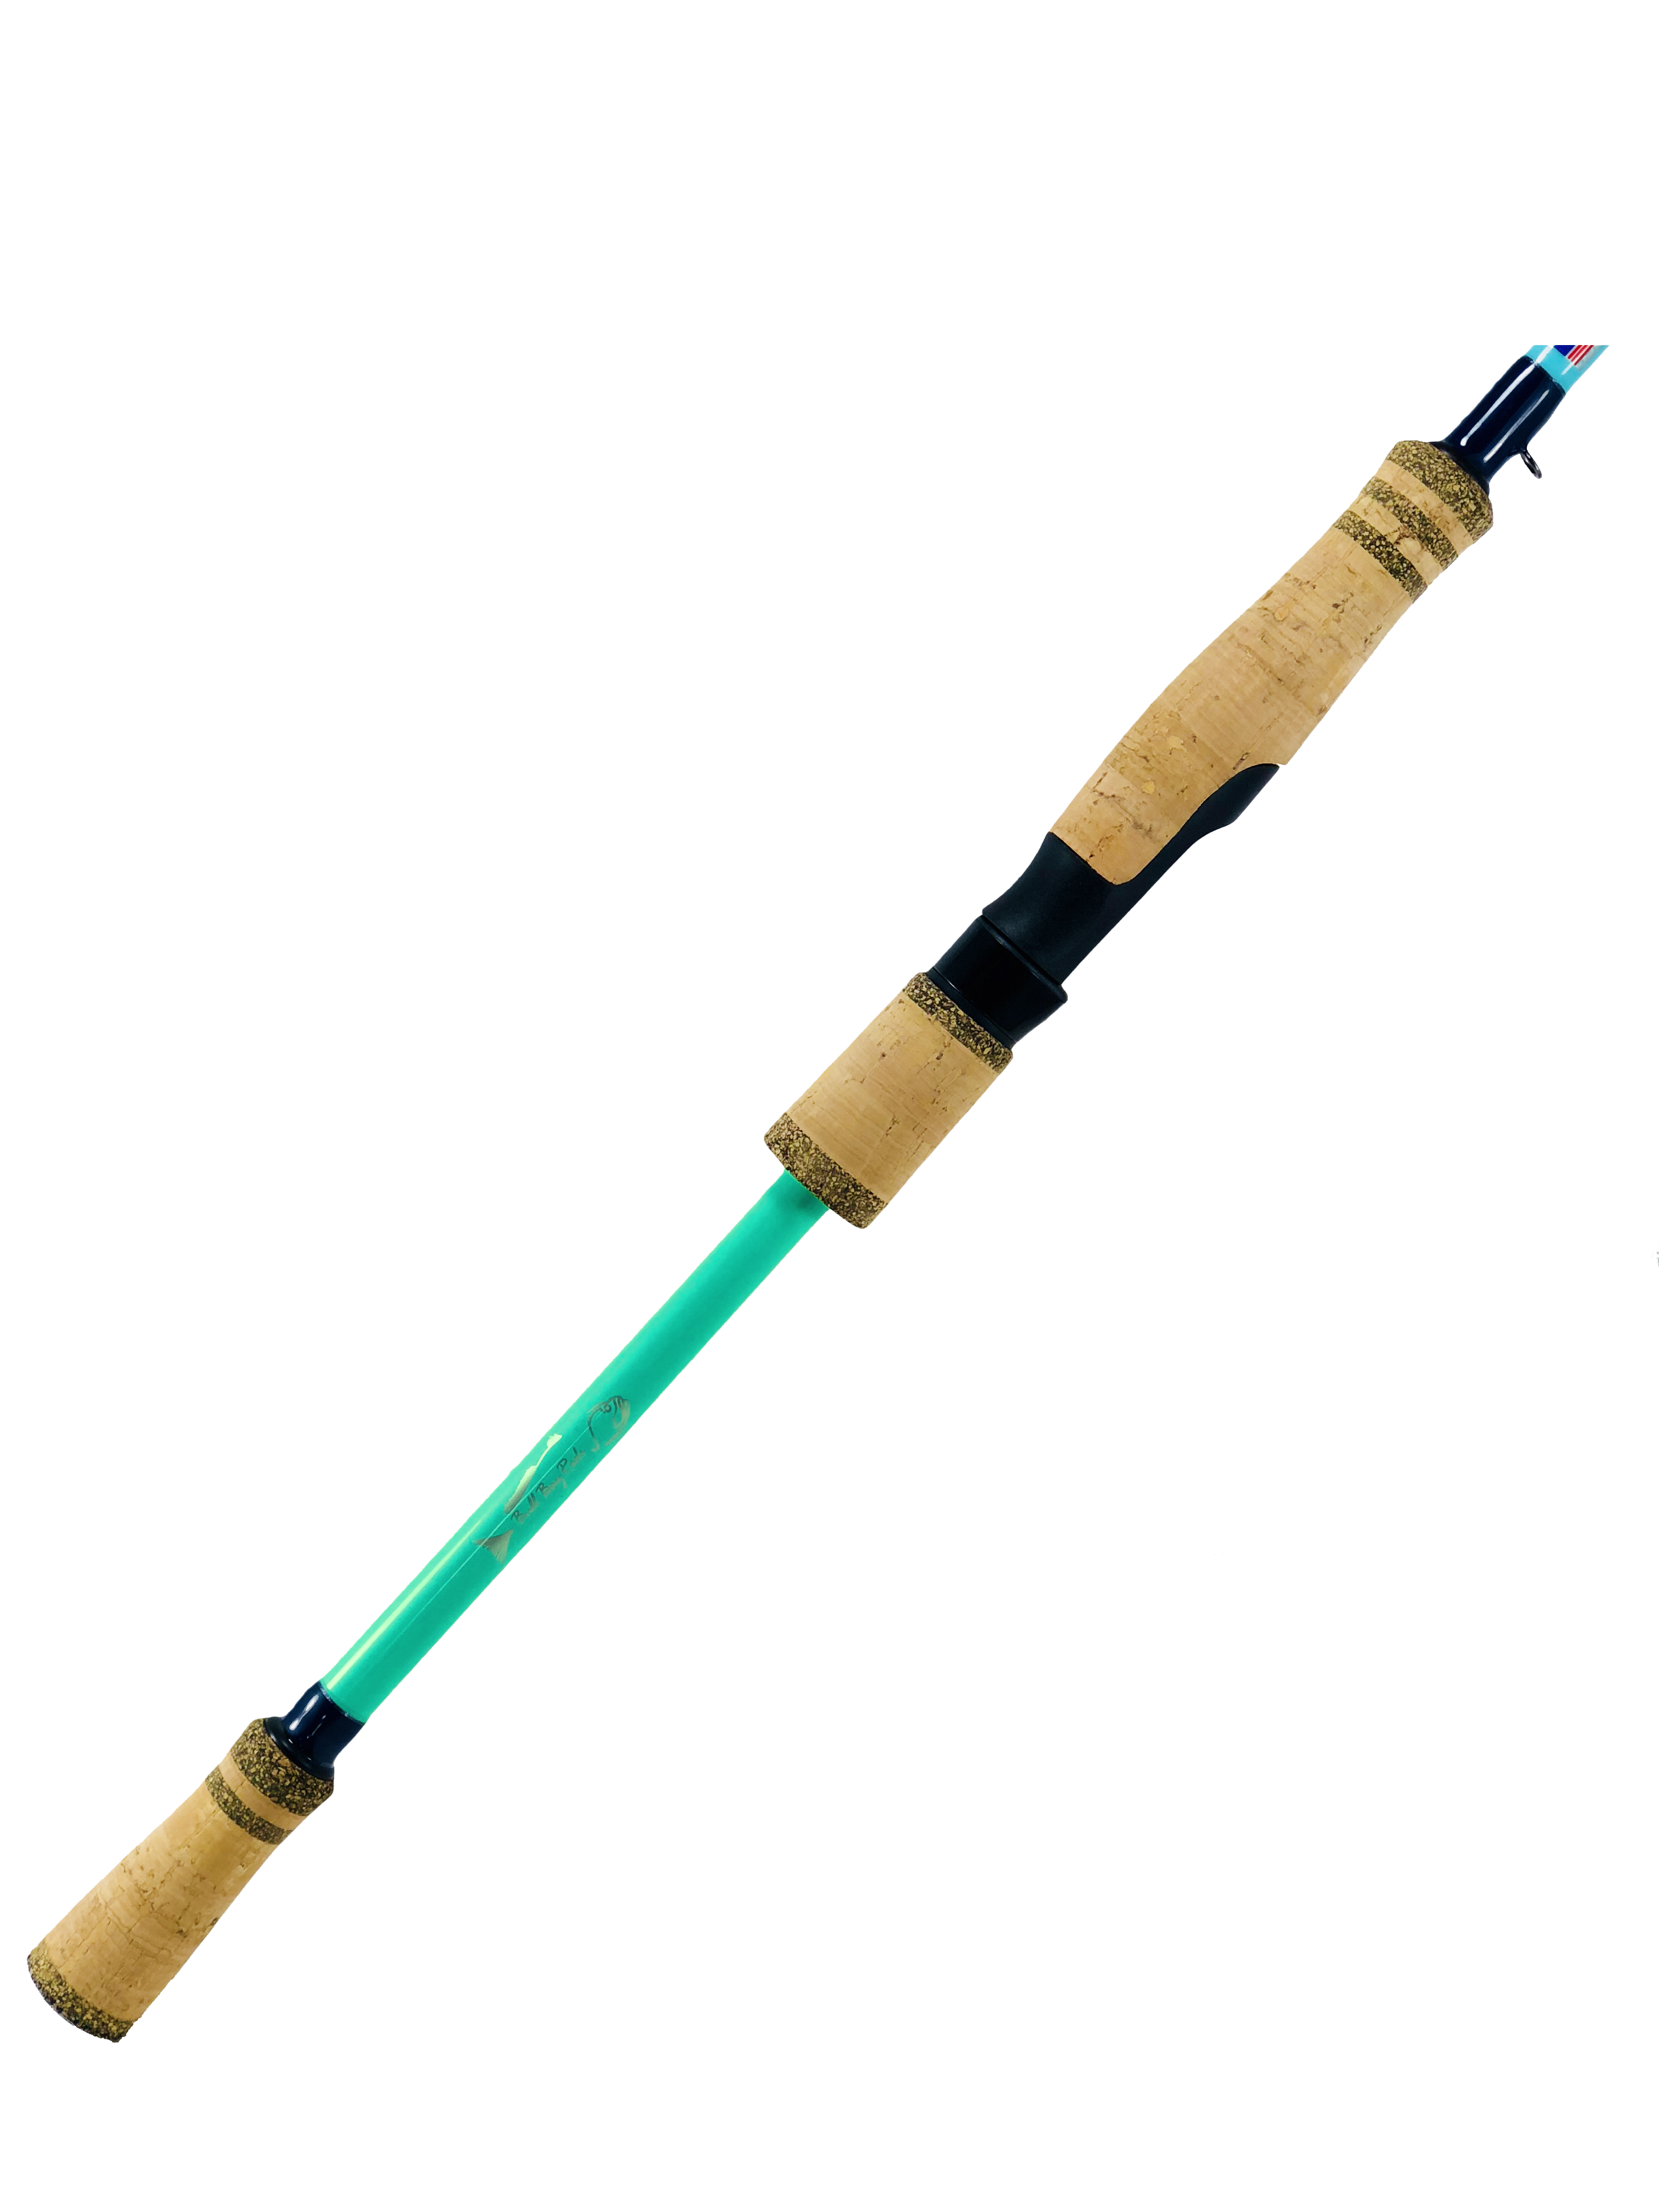 13 Fishing Fate Black Combo 7'1' MH Casting Rod - Andy Thornal Company